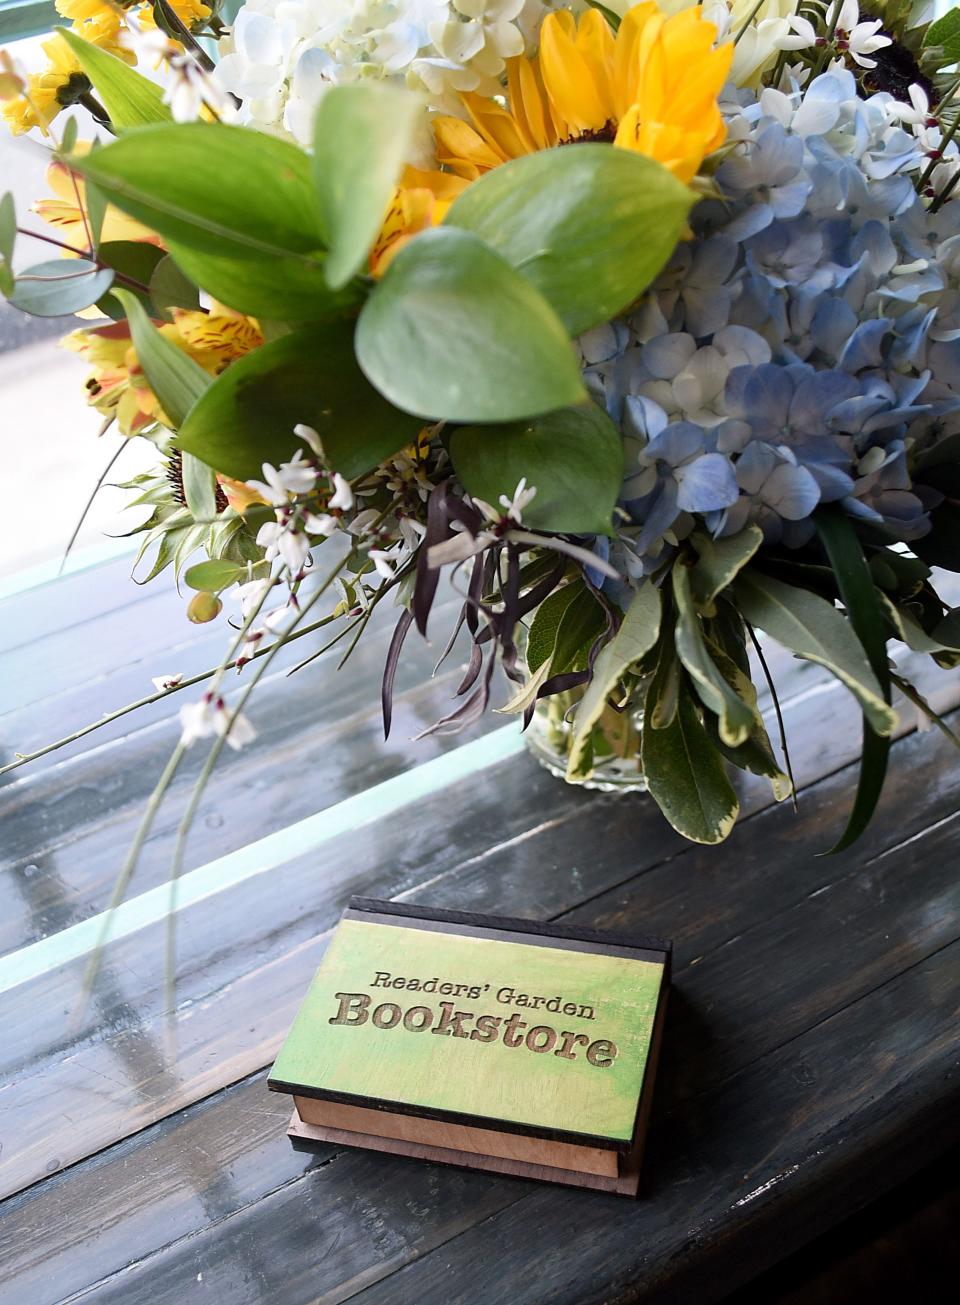 A miniature example of the new sign for Reader's Garden Bookstore. After nearly 20 years on Broadway, the Reader's Garden Bookstore is moving locations in Granville. It will now be on Prospect Street in the former SteamRoller Bagel shop.